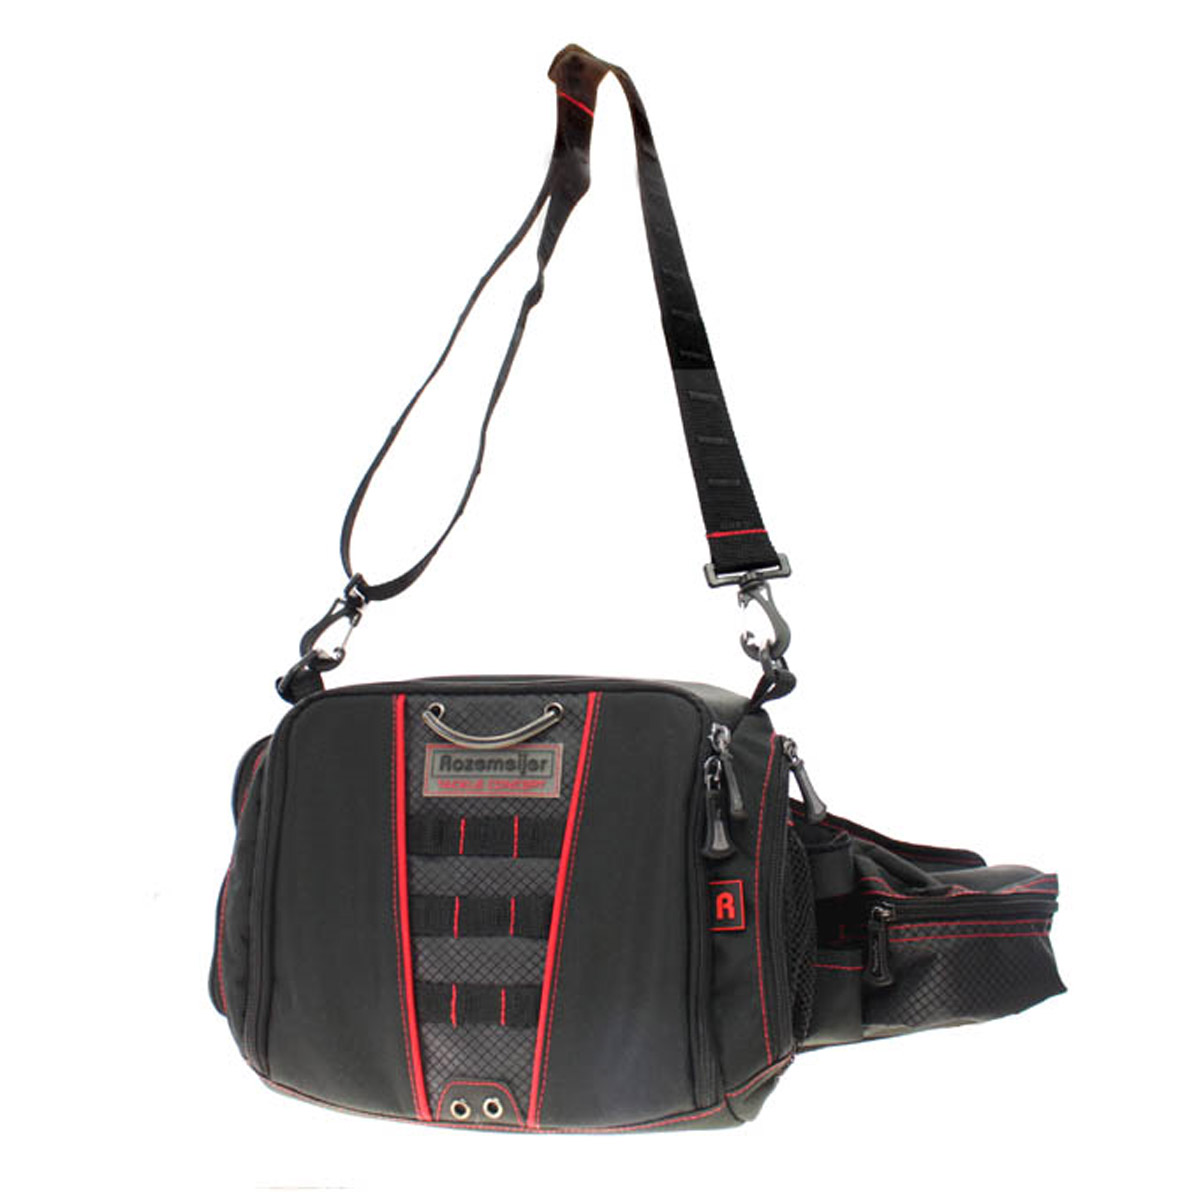 Rozemeijer Tackle Concept Hip Pack